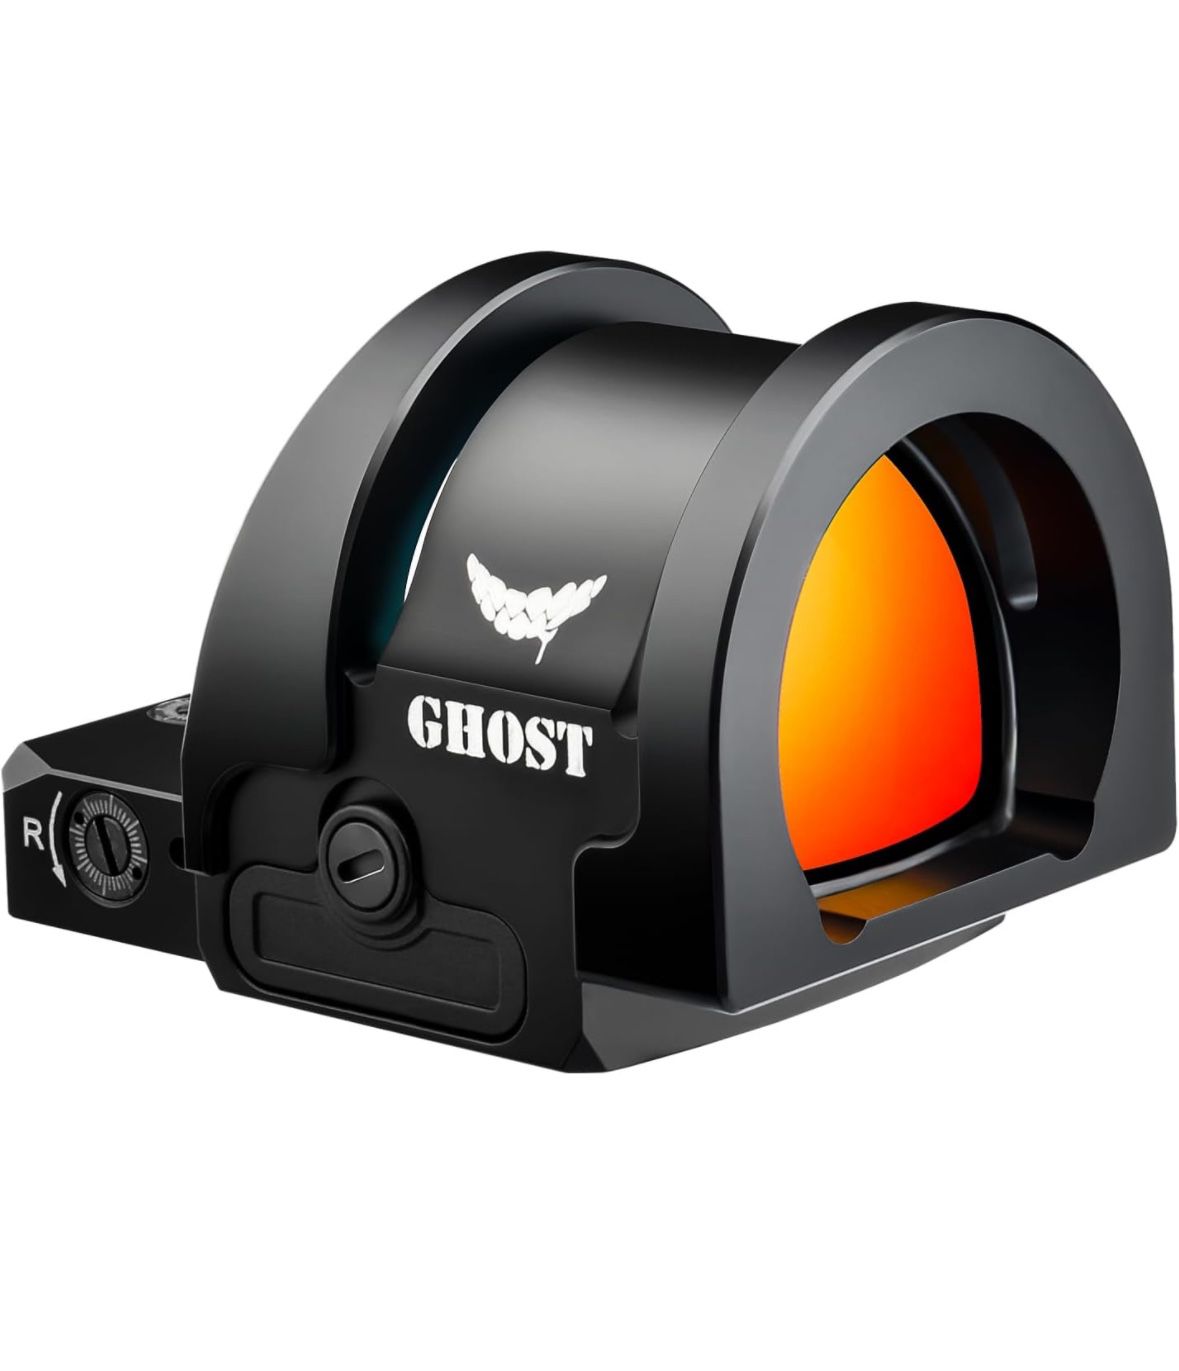 Cyelee Ghost HDG Drop-Proof Multi-Reticle Duty Red Dot for RMR/507C Footprint - 2 MOA Dot & 26 MOA Circle with Motion Deactivated Standby(Similiar to 